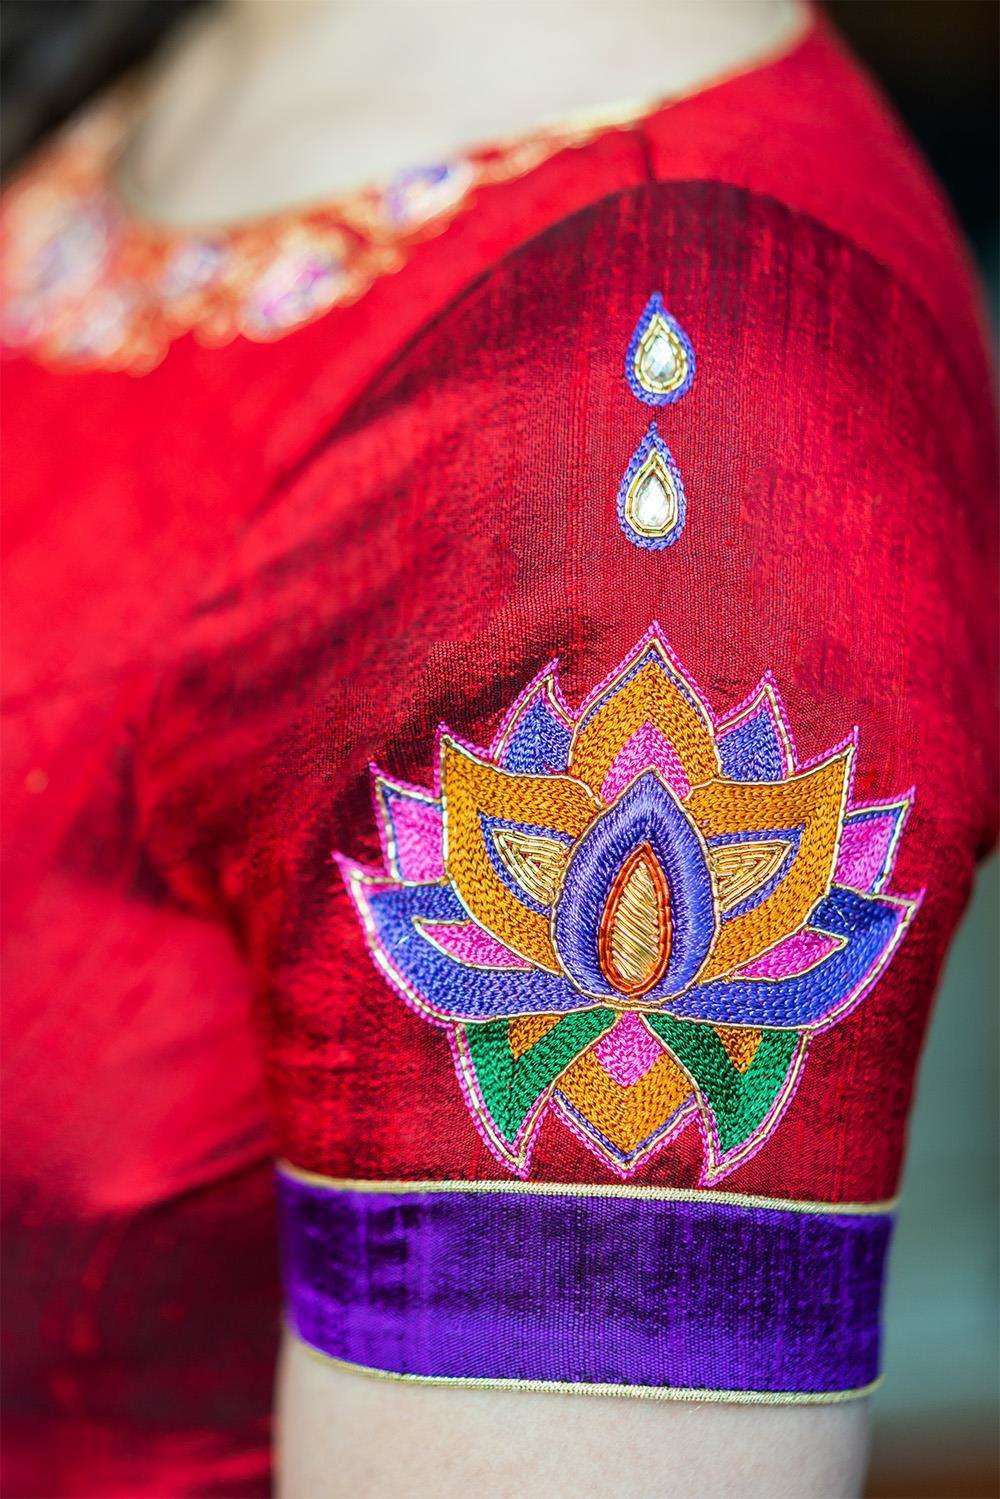 Rudrama Devi - Hand embroidered blouse - House of Blouse